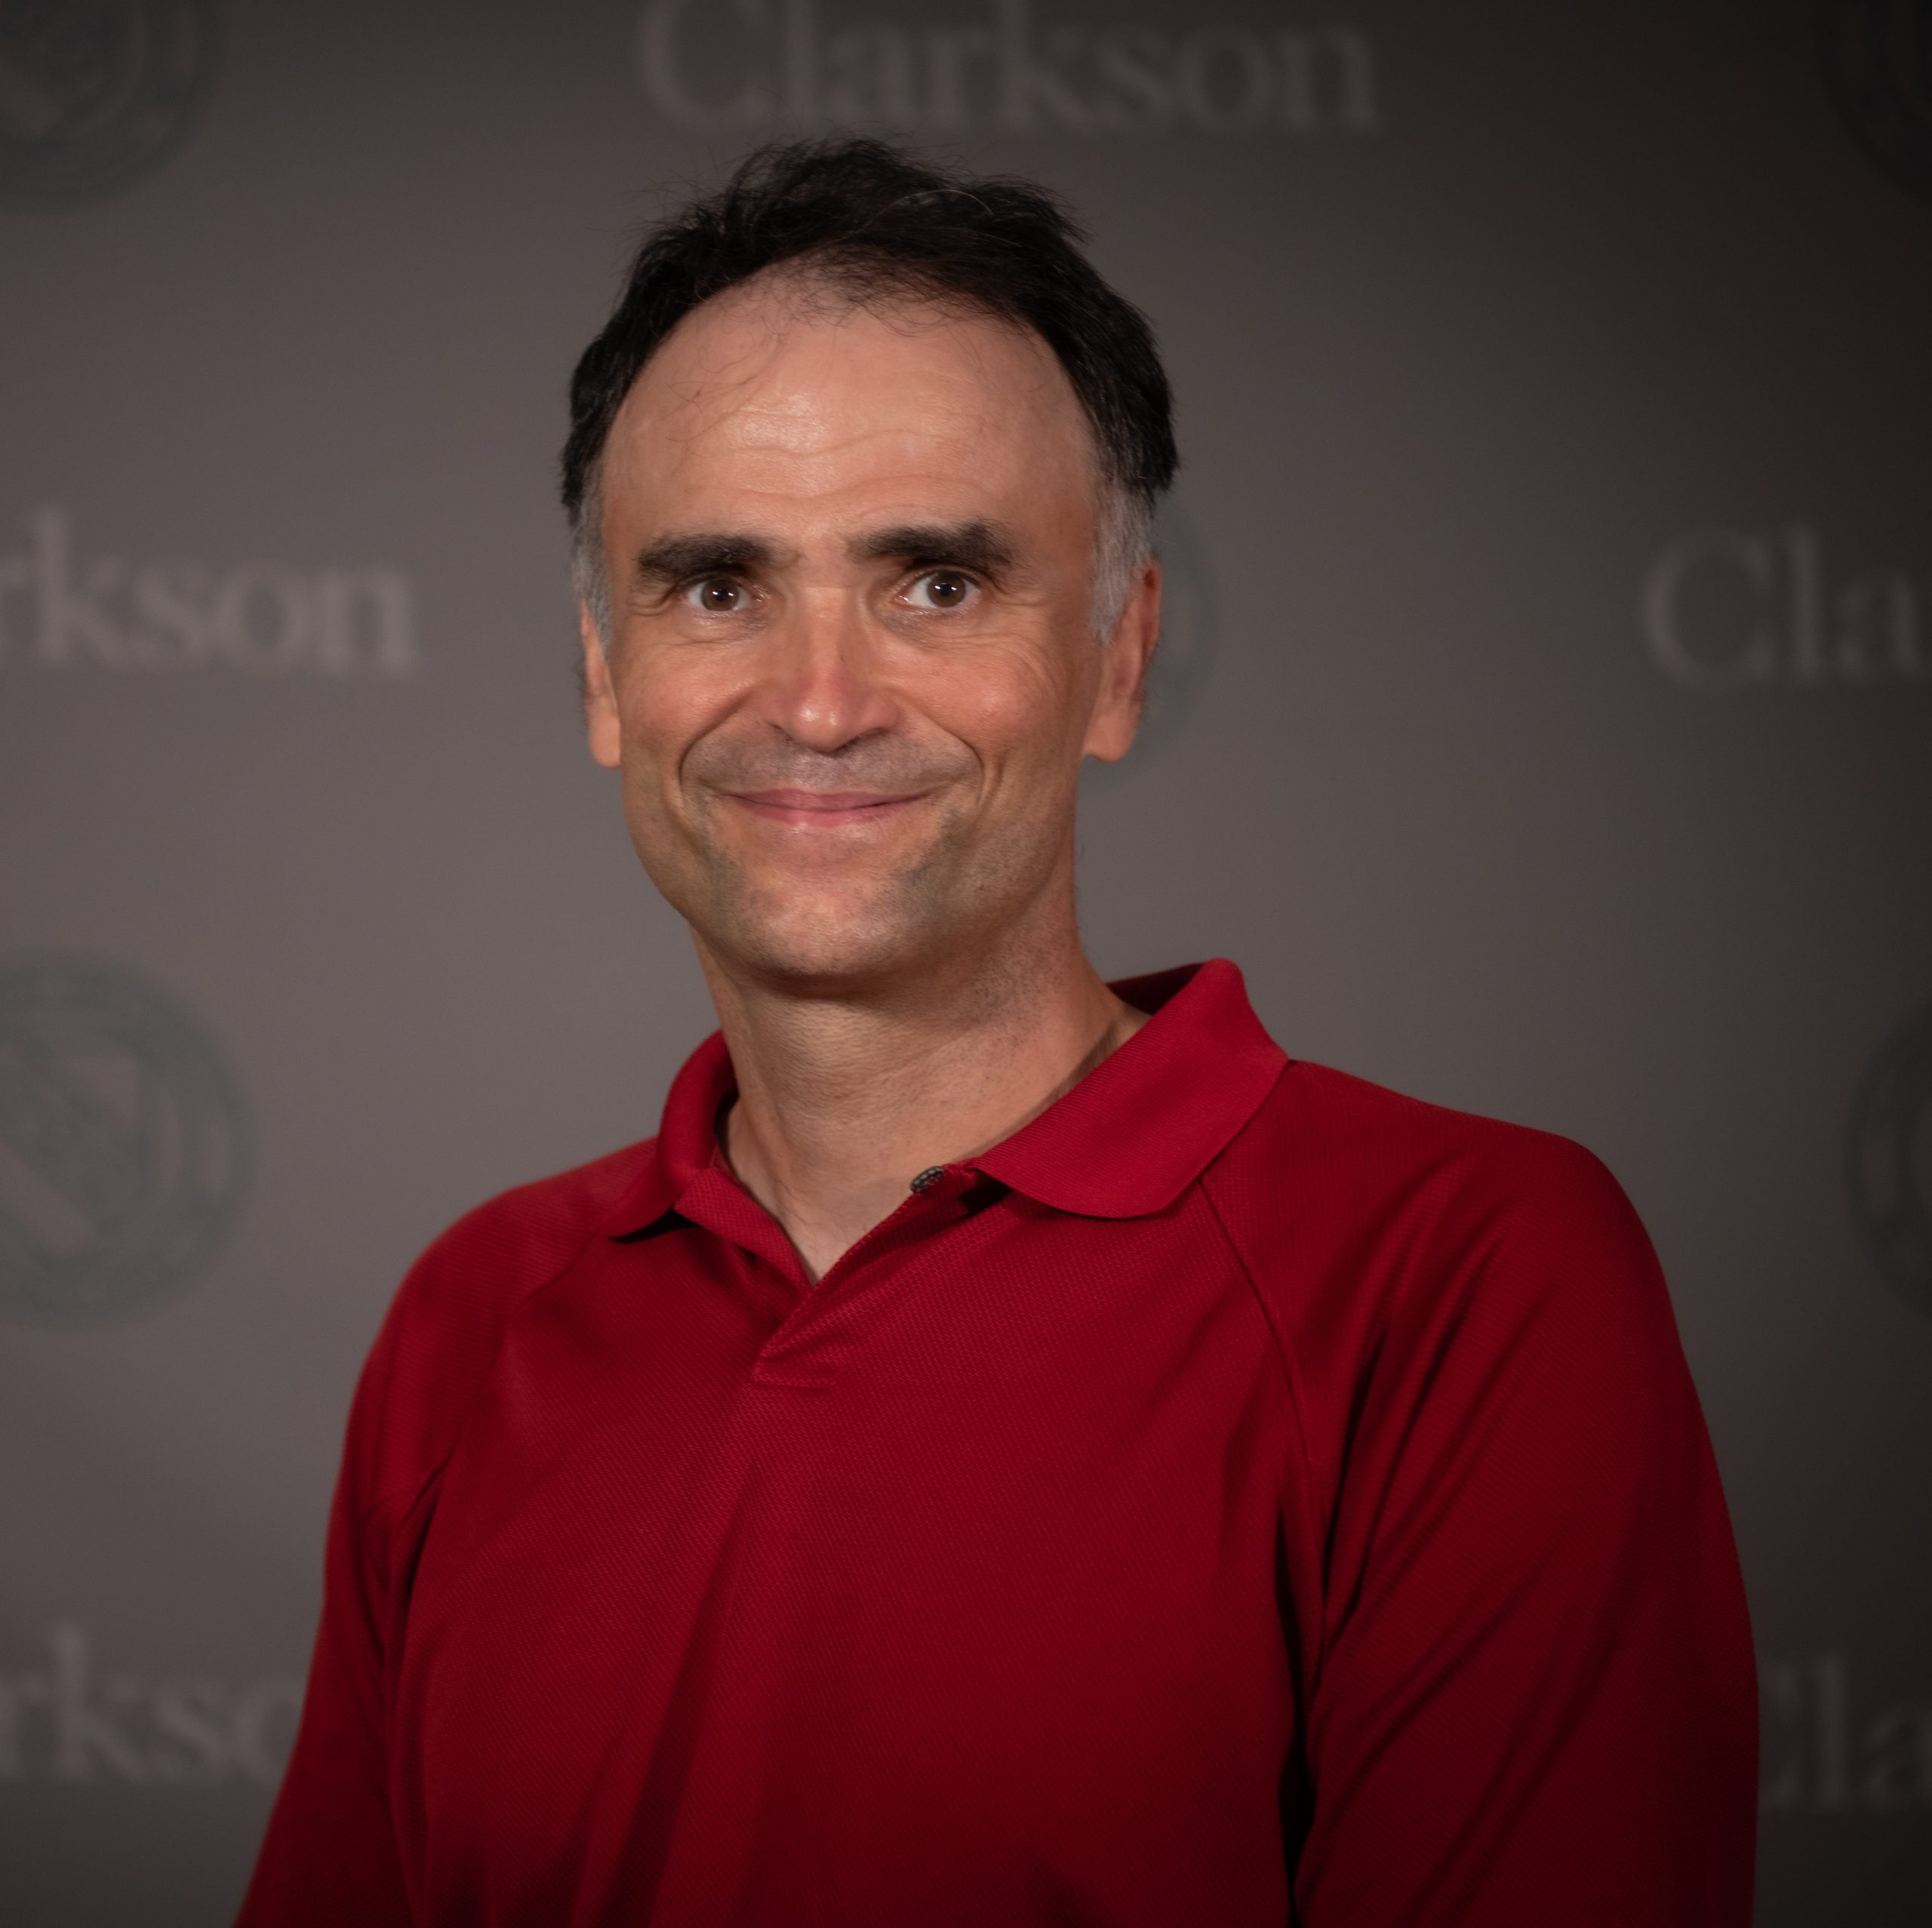 An Interview with Boris Jukic, director of Clarkson’s Applied Data Science master’s degree program